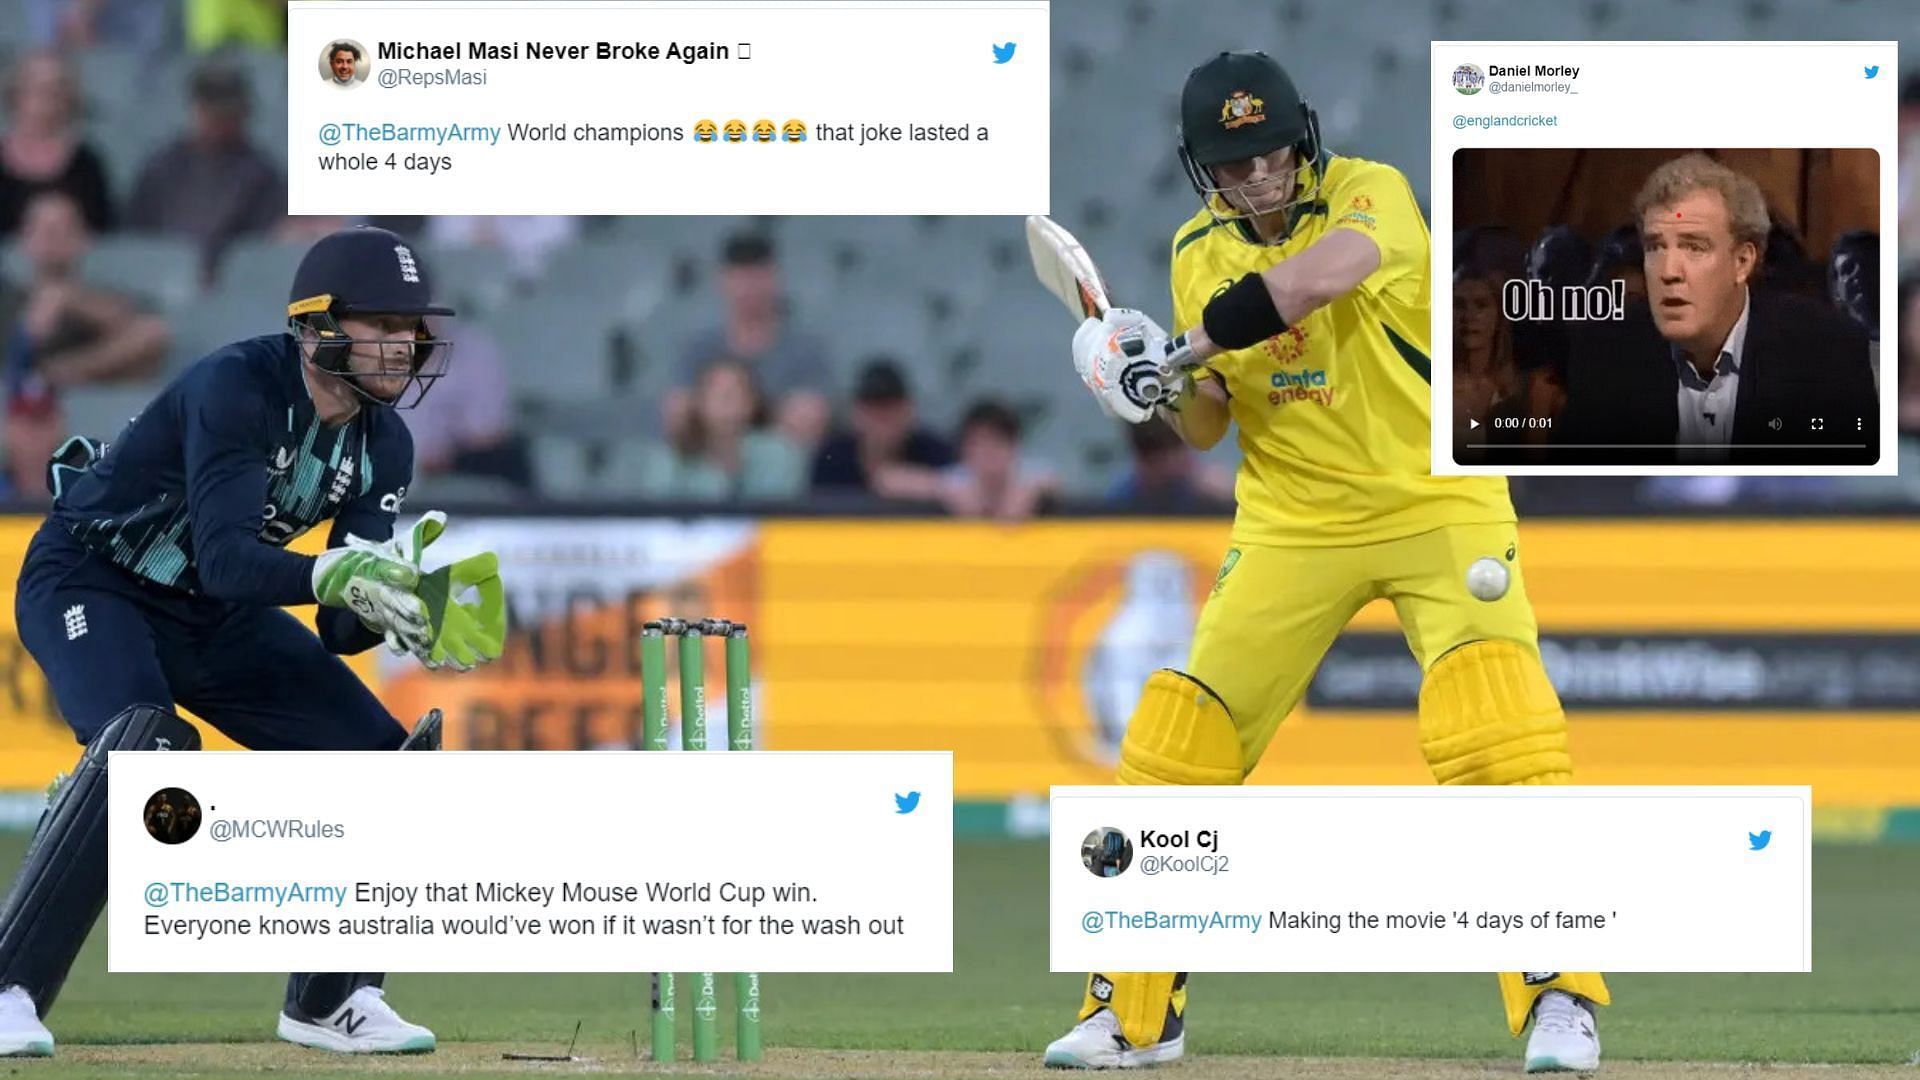 &quot;Karma hits back&quot; - Twitter reacts as England get humbled by Australia in the first ODI 